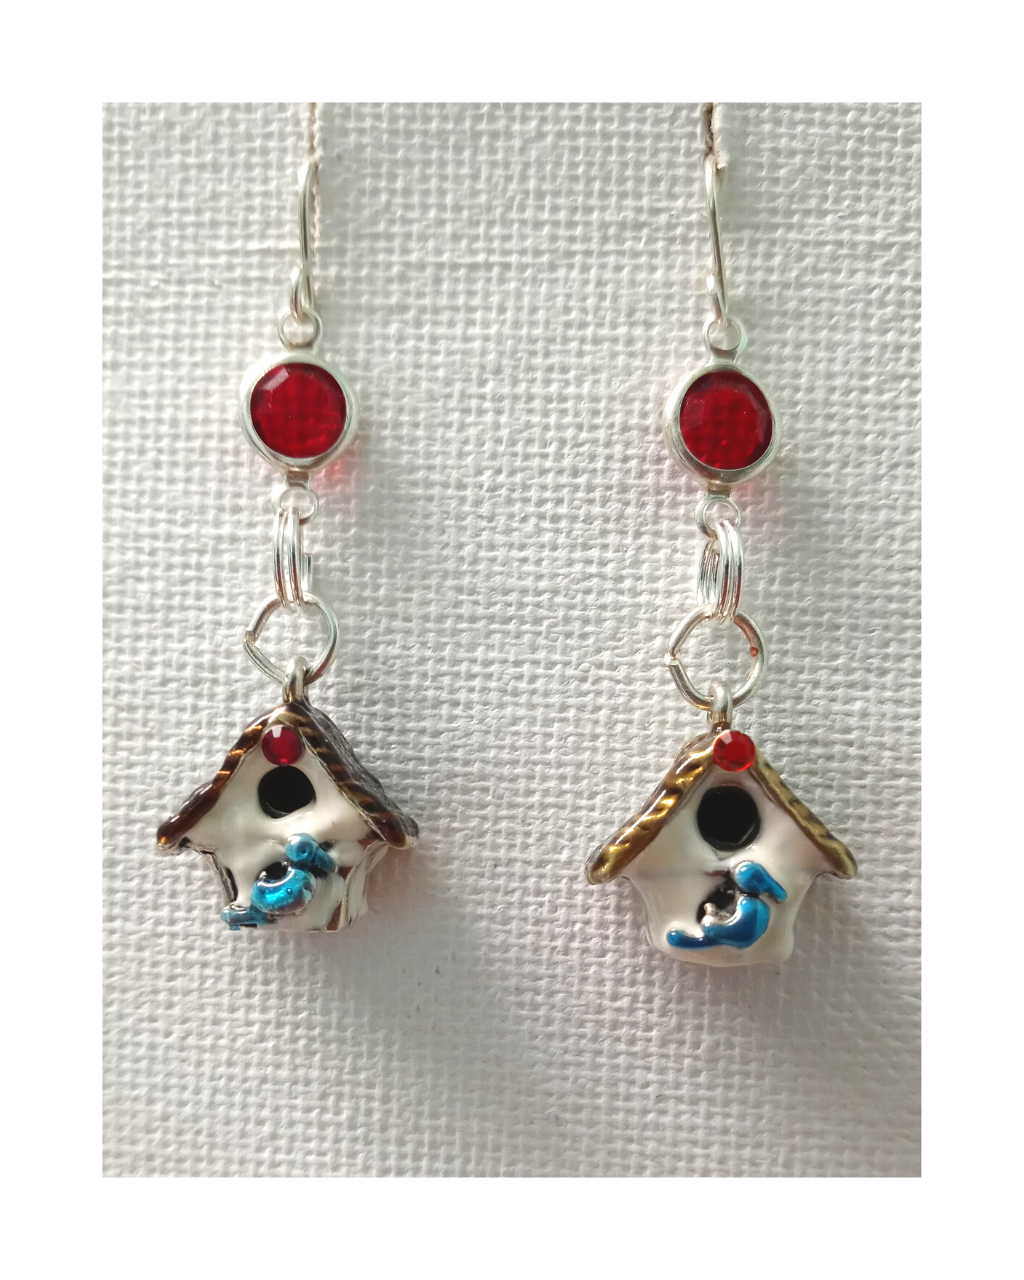 Exclusive Sterling 3-D 2-sided Hand-enameled Bluebird House with Red Swarovski Crystals Earrings 1 13/16"L X 5/8"W ONE ONLY